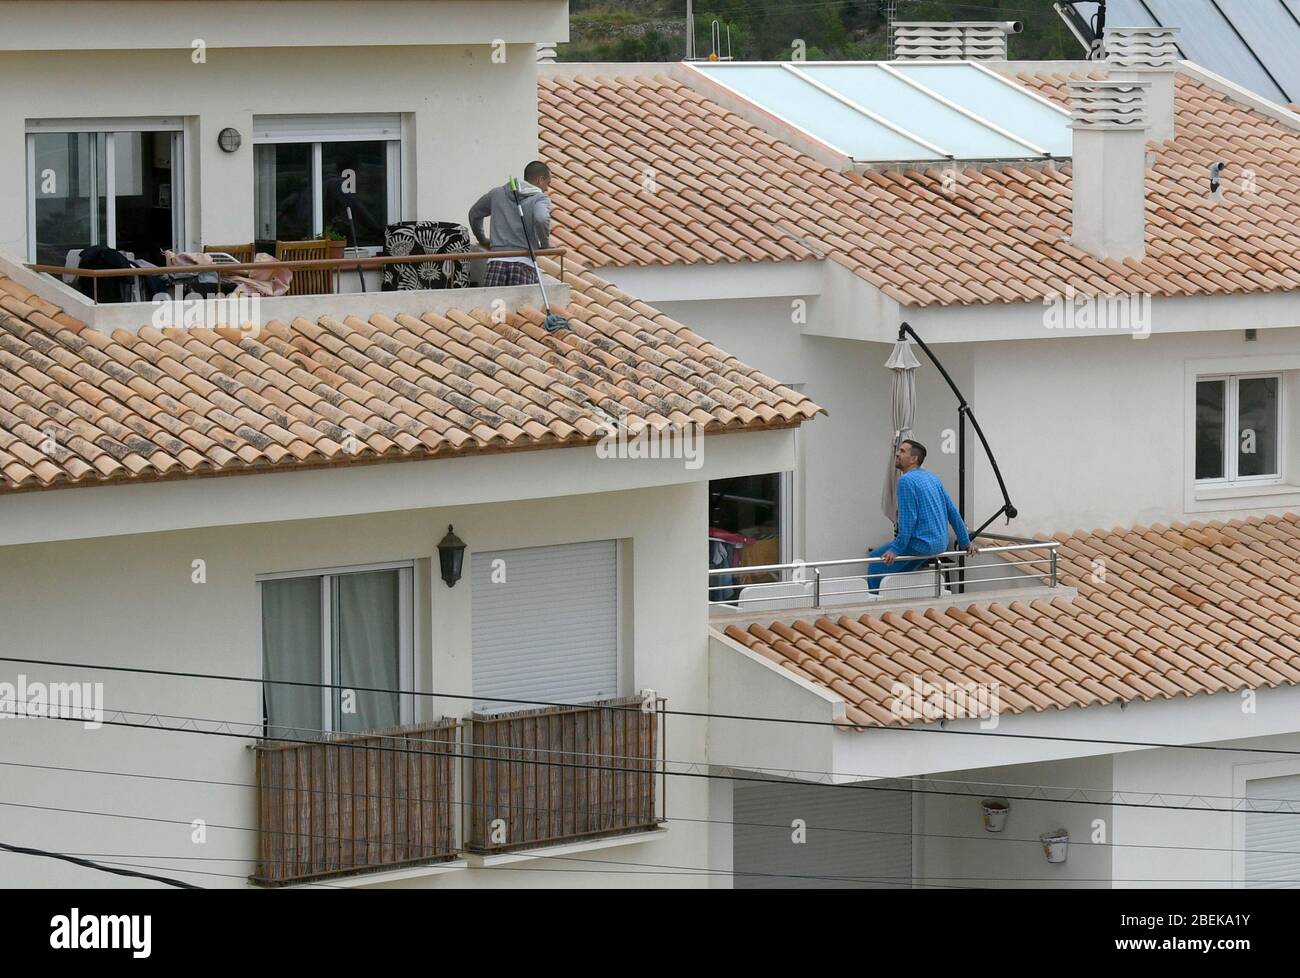 Altea La Vella, Alicante Province, Spain, March 21st, 2020, two young men on their balconies Stock Photo